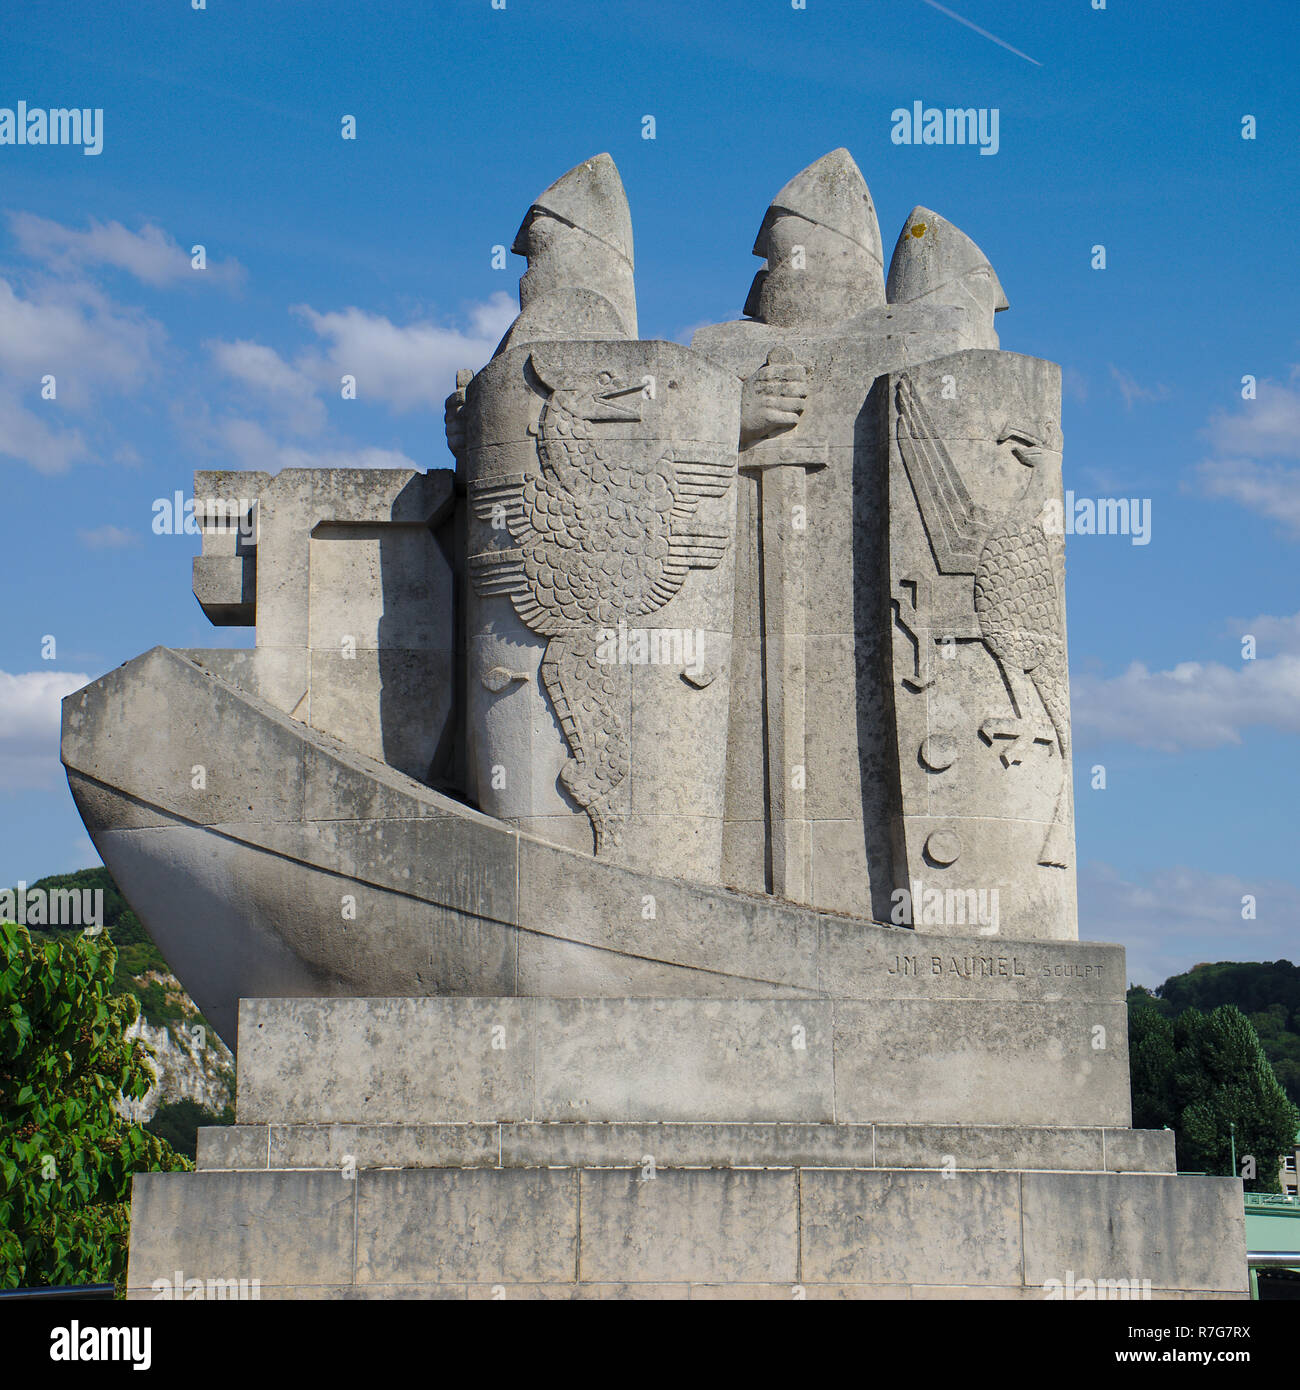 Statues of Jean-Marie Baumel, on the right bank of the Boieledieu bridge in  Rouen in Seine-Maritime, France, Normandy Stock Photo - Alamy